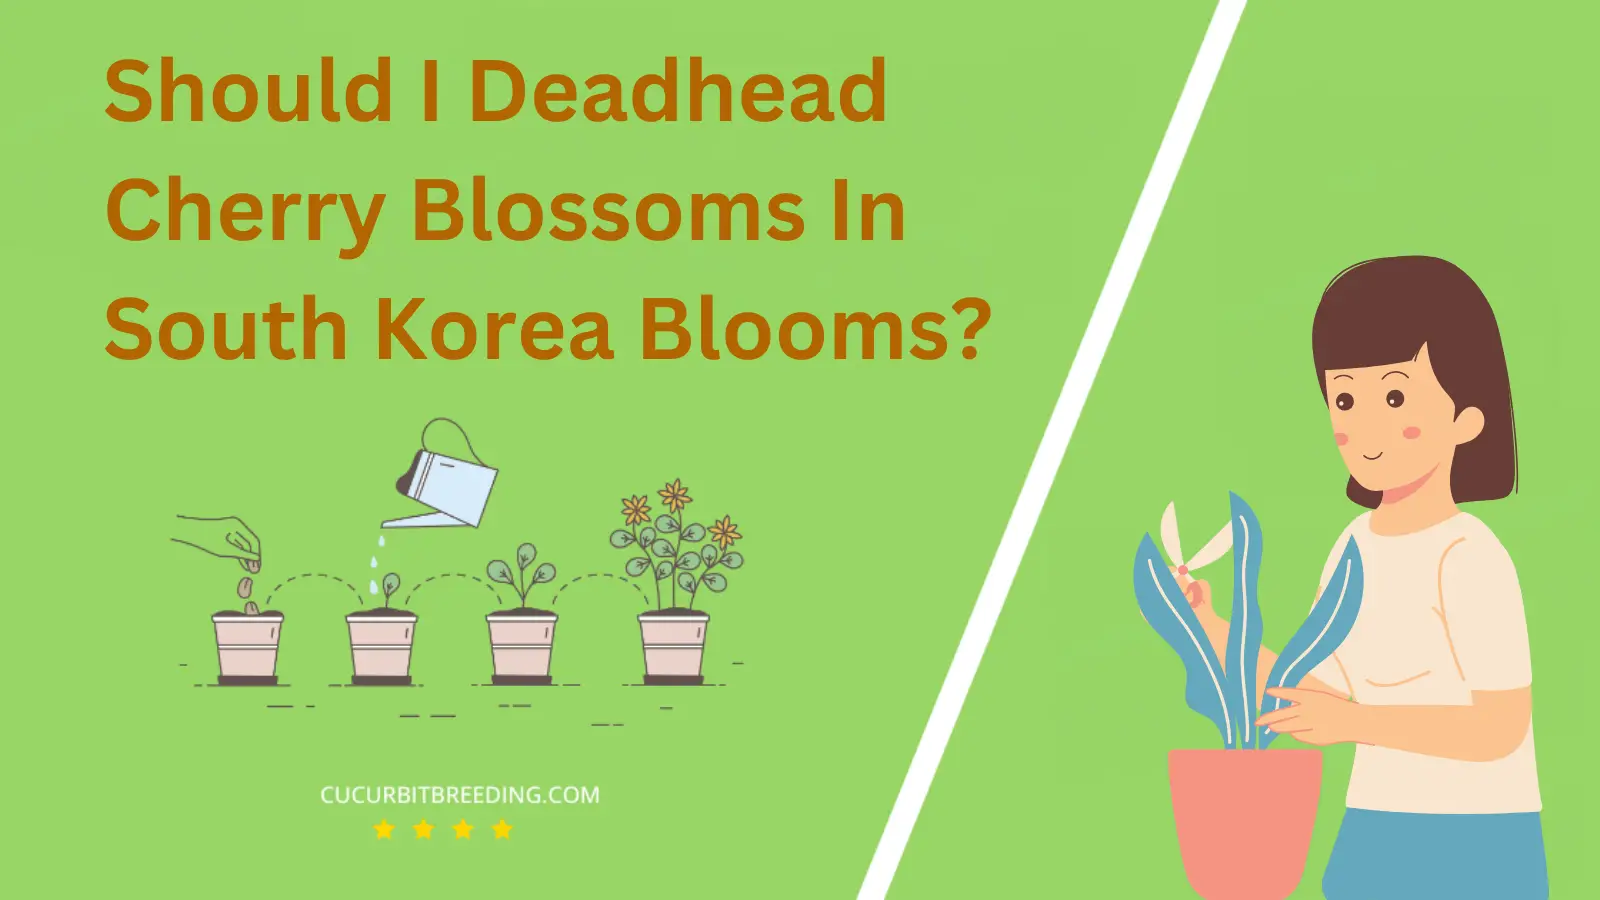 Should I Deadhead Cherry Blossoms In South Korea Blooms?